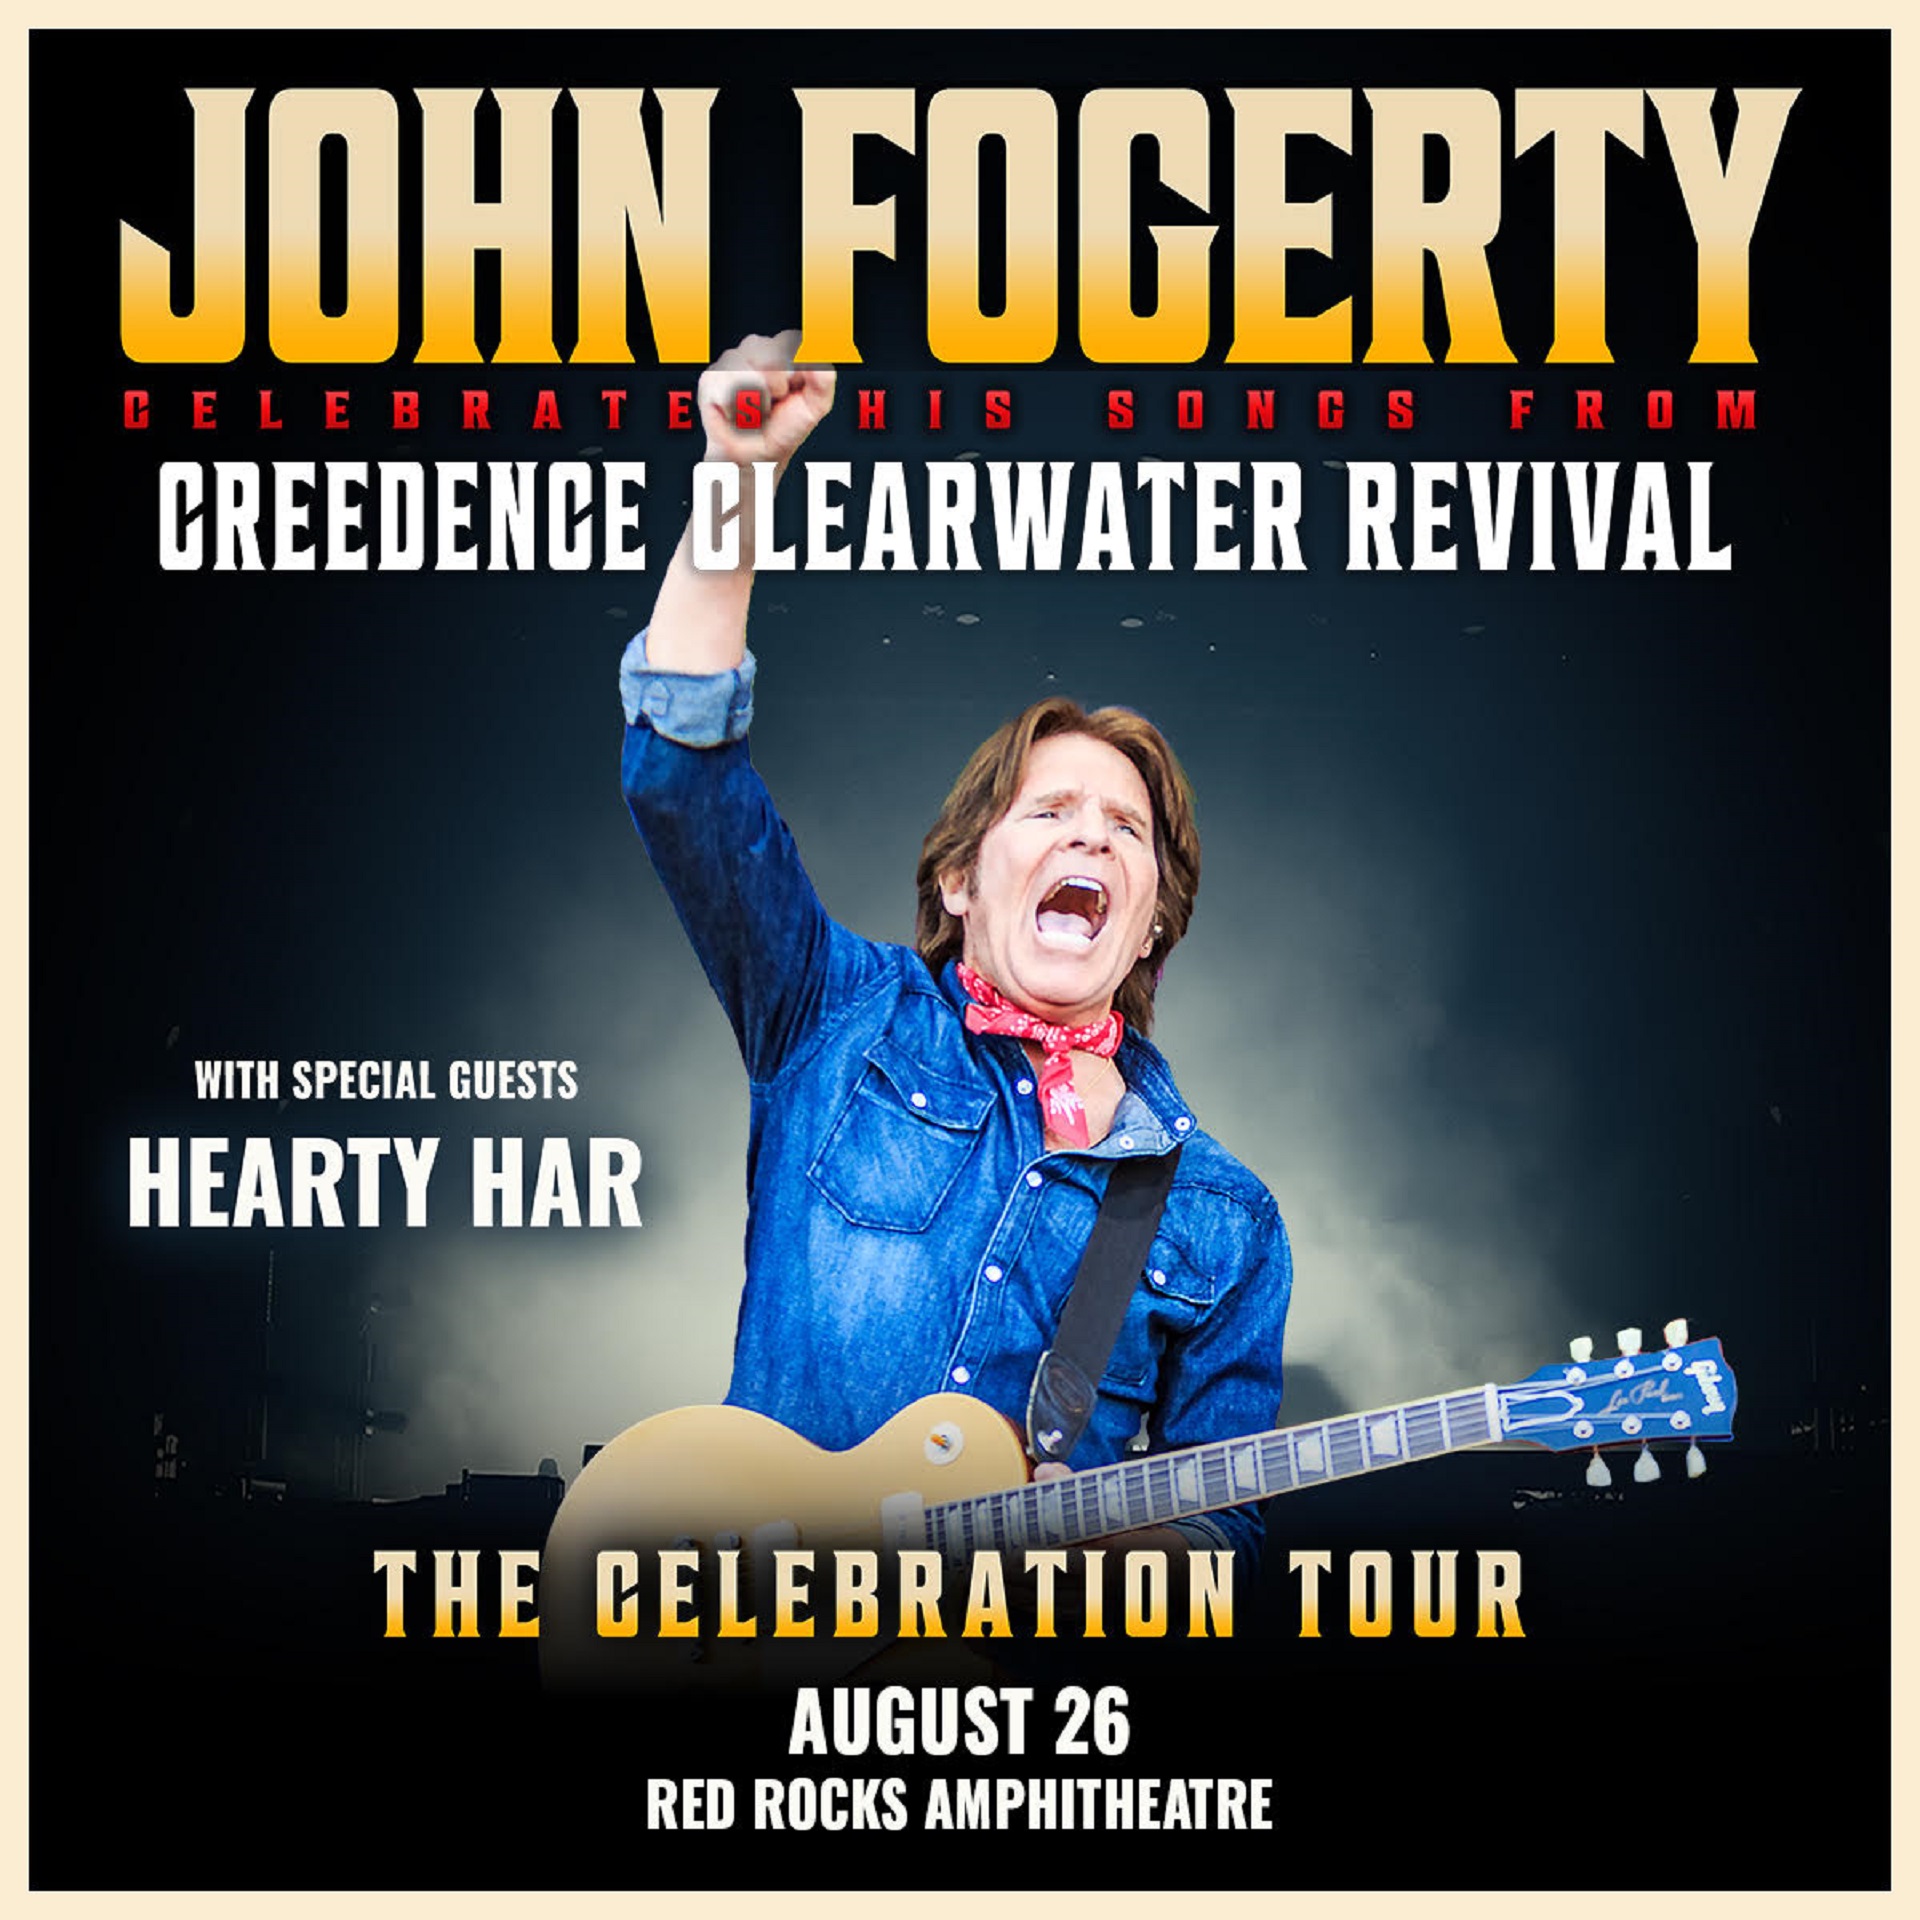 JOHN FOGERTY Continues His 'Celebration Tour' This Summer - Kicking off June 2nd